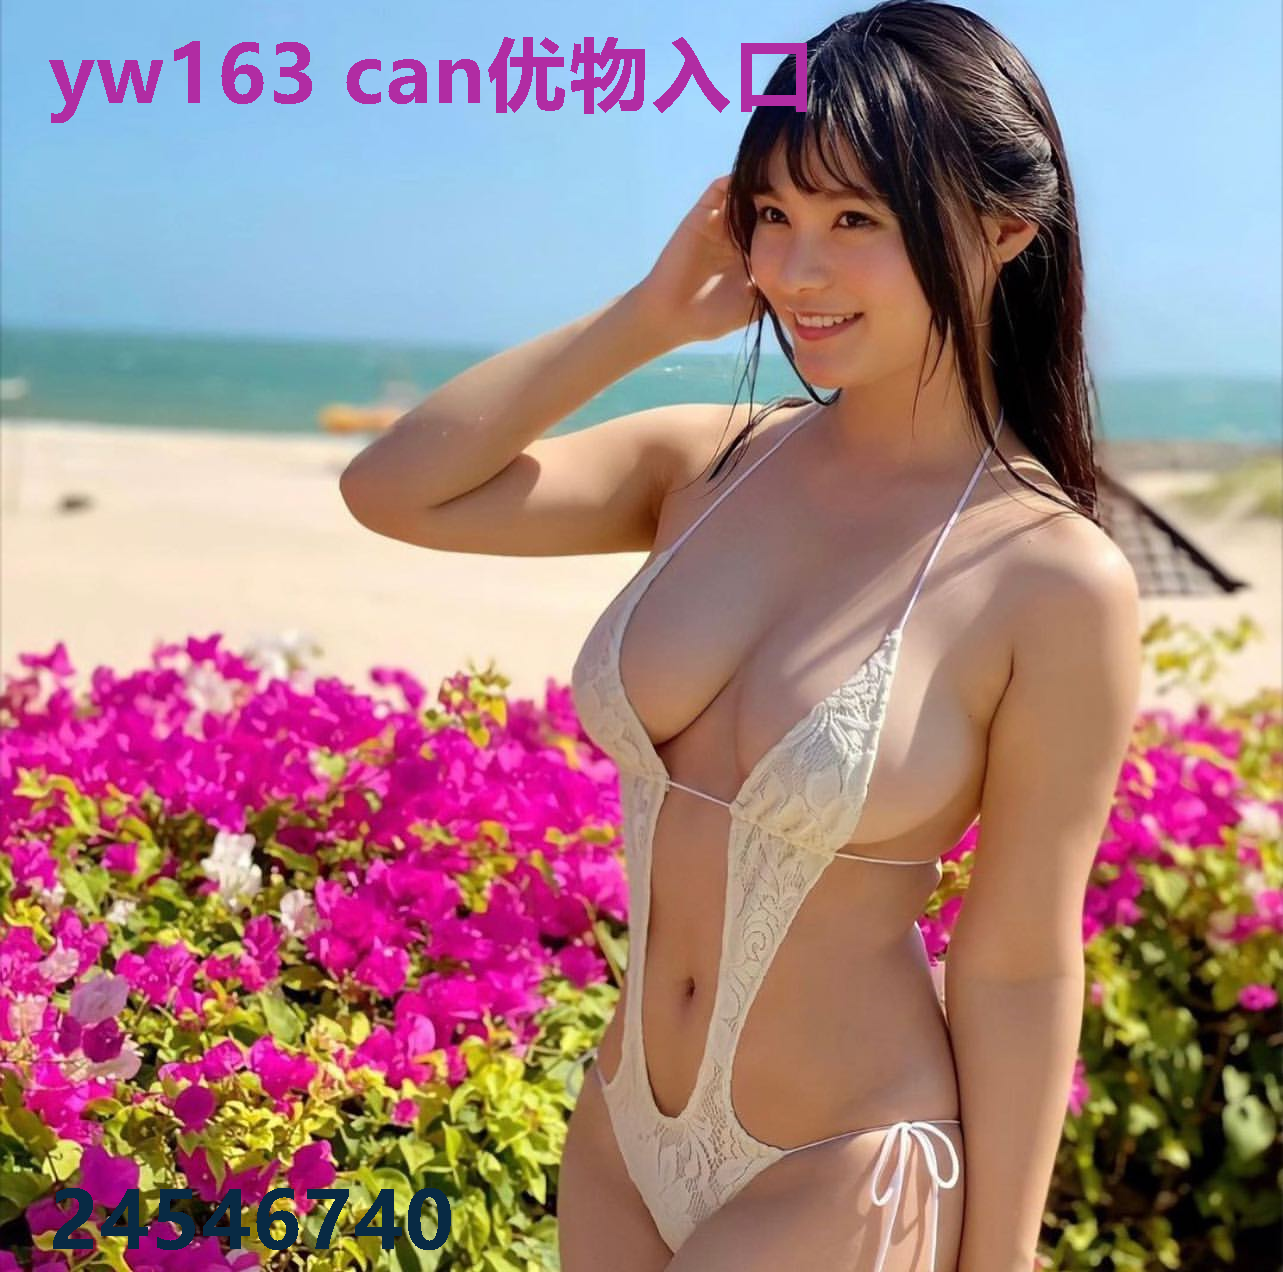 yw163 can优物入口